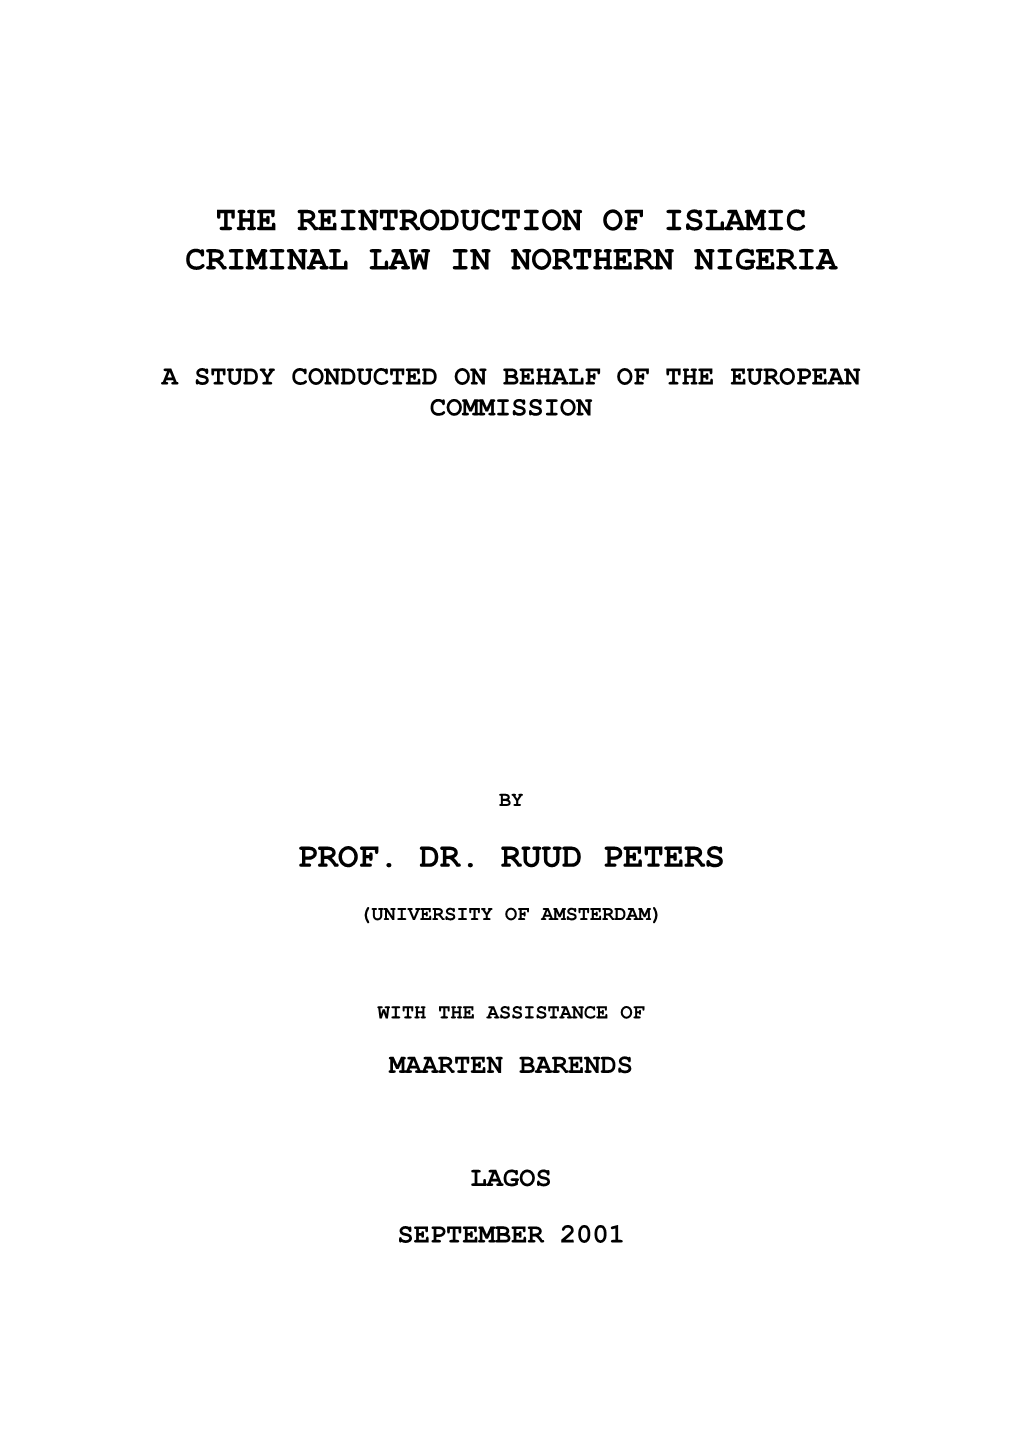 The Reintroduction of Islamic Criminal Law in Northern Nigeria